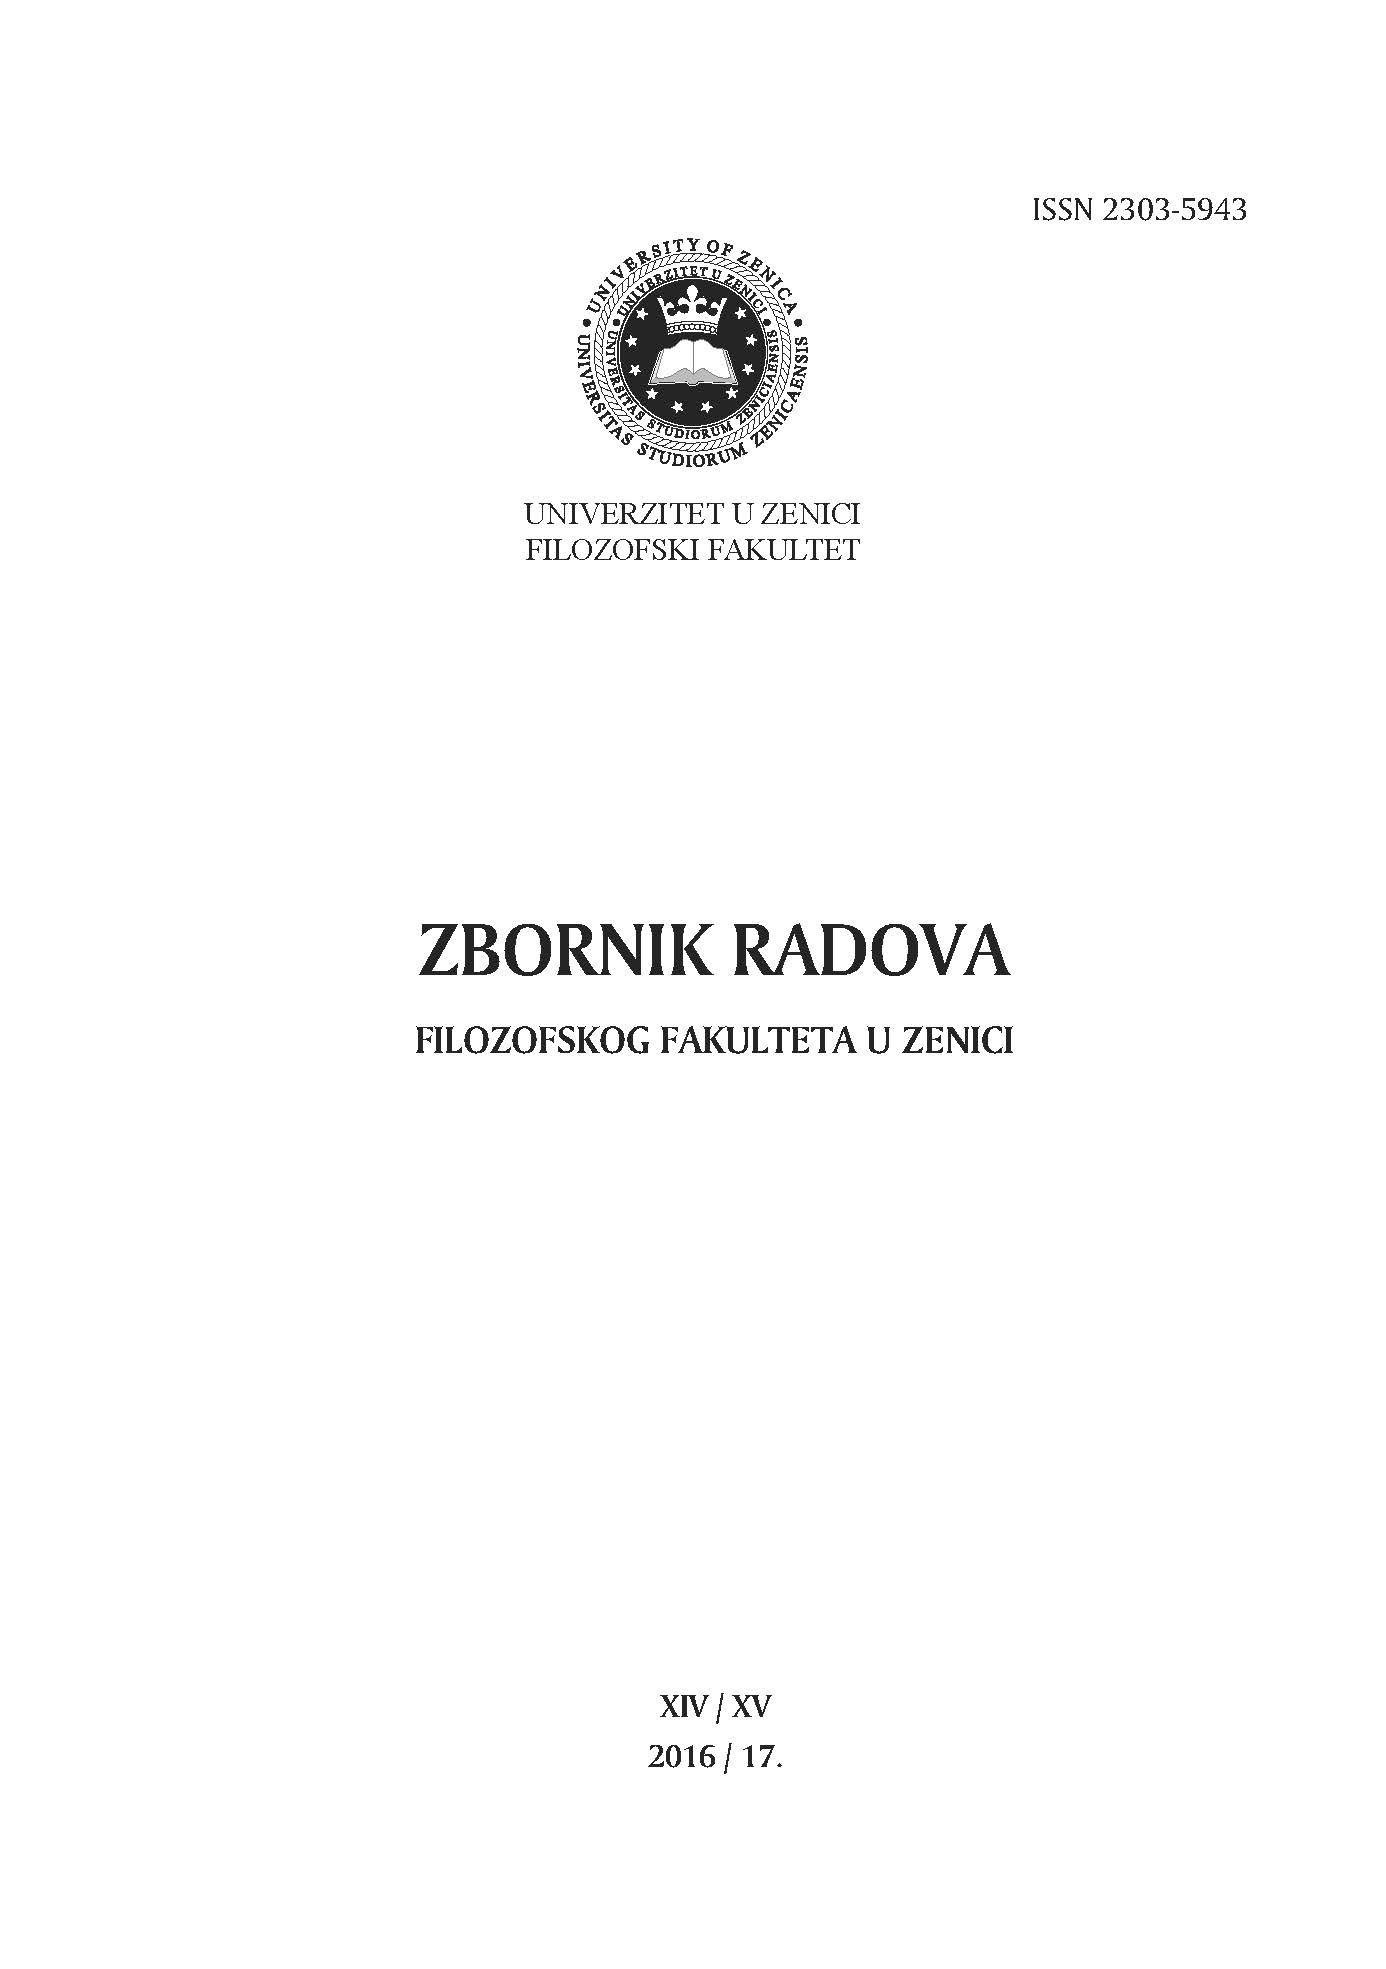 Proceedings of Faculty of Philosophy Cover Image